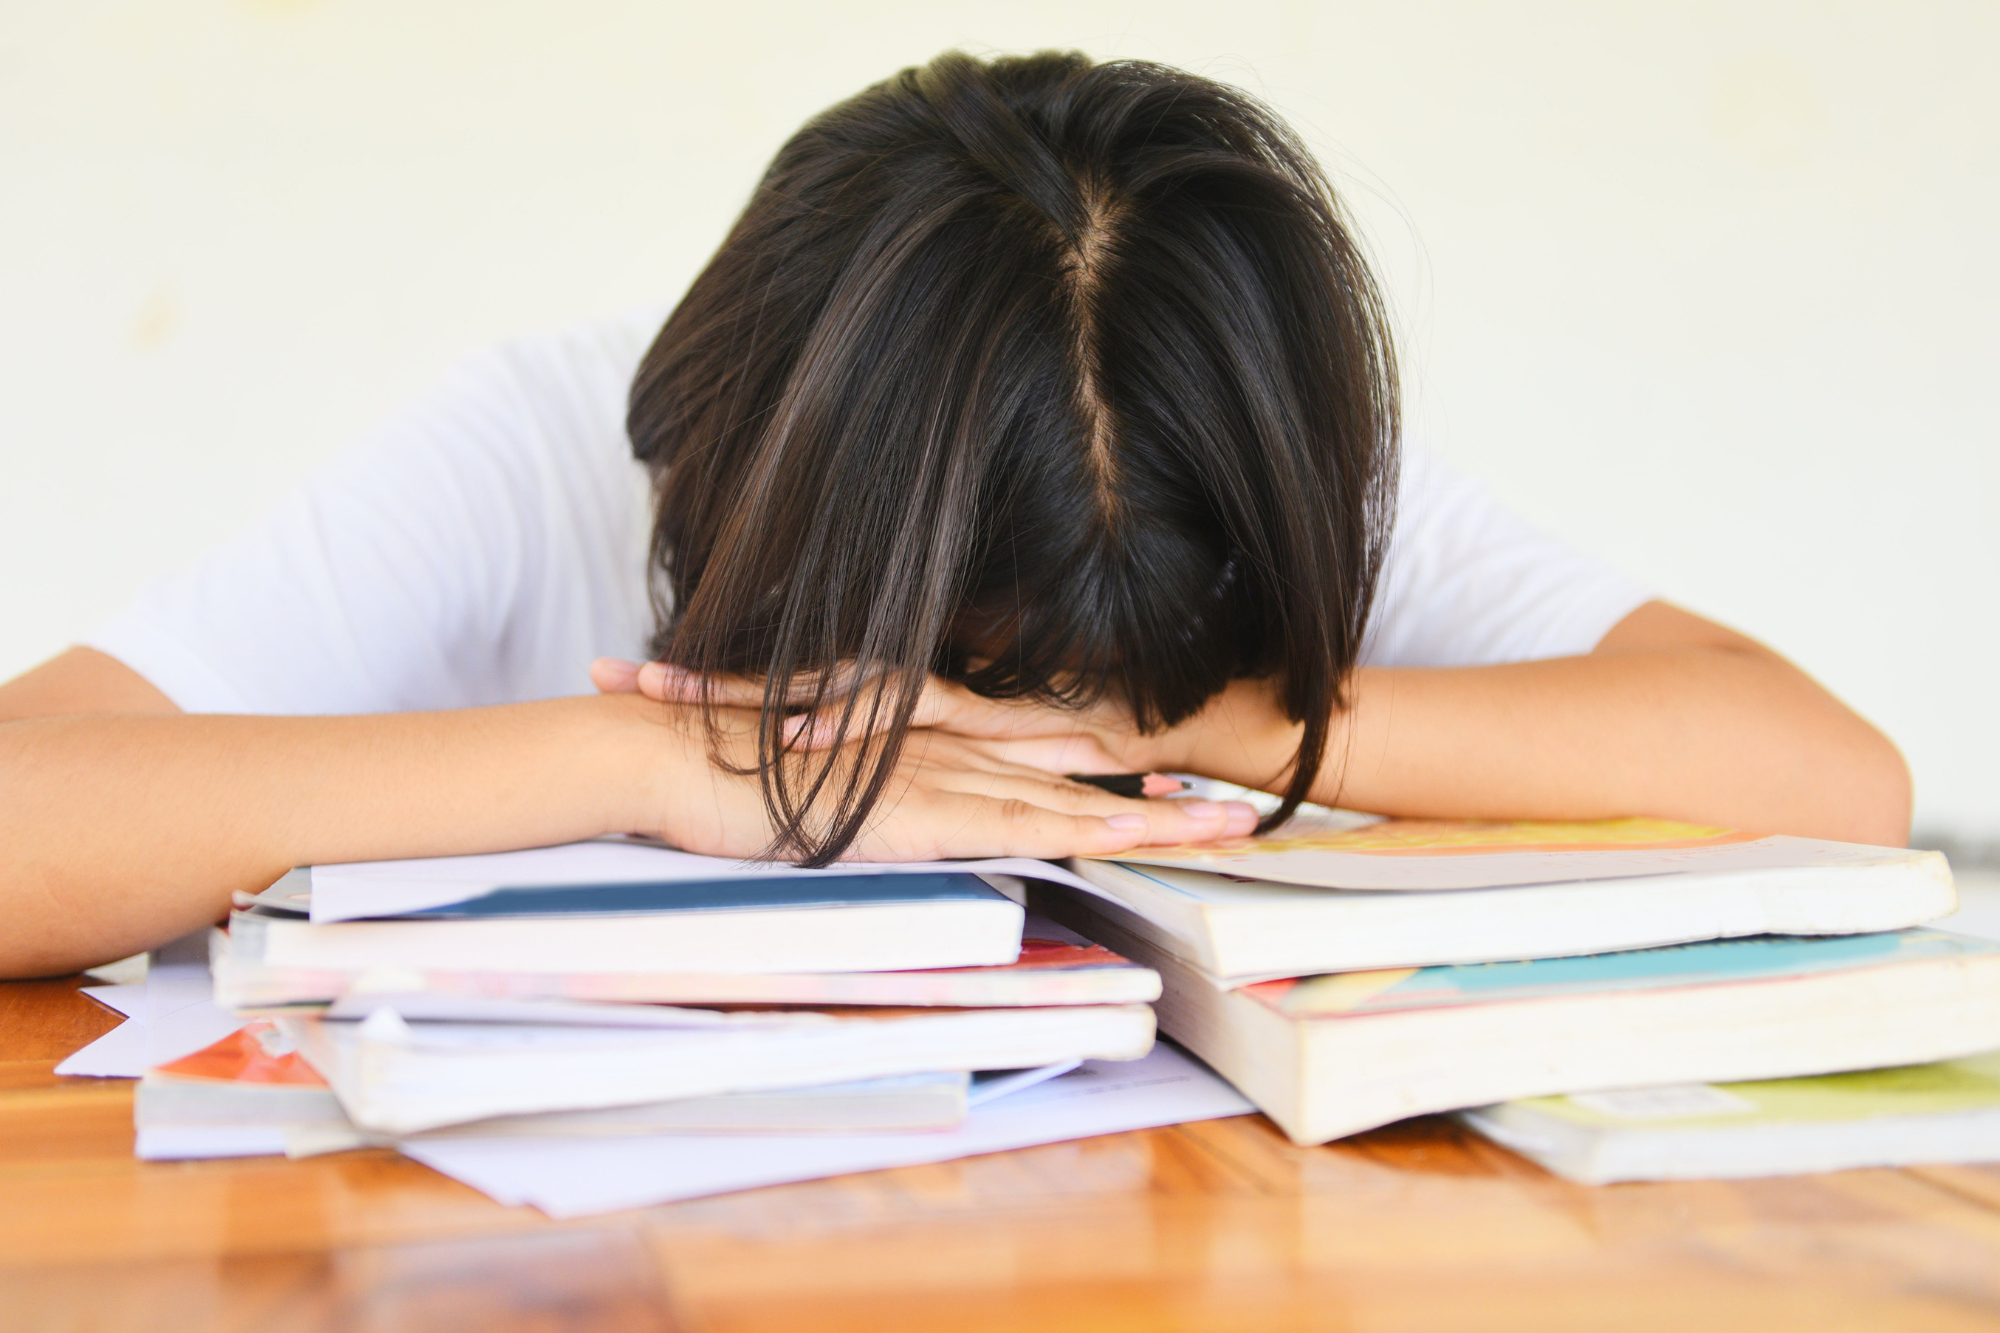 Stressed young person leaning on a pile of text books during exams.